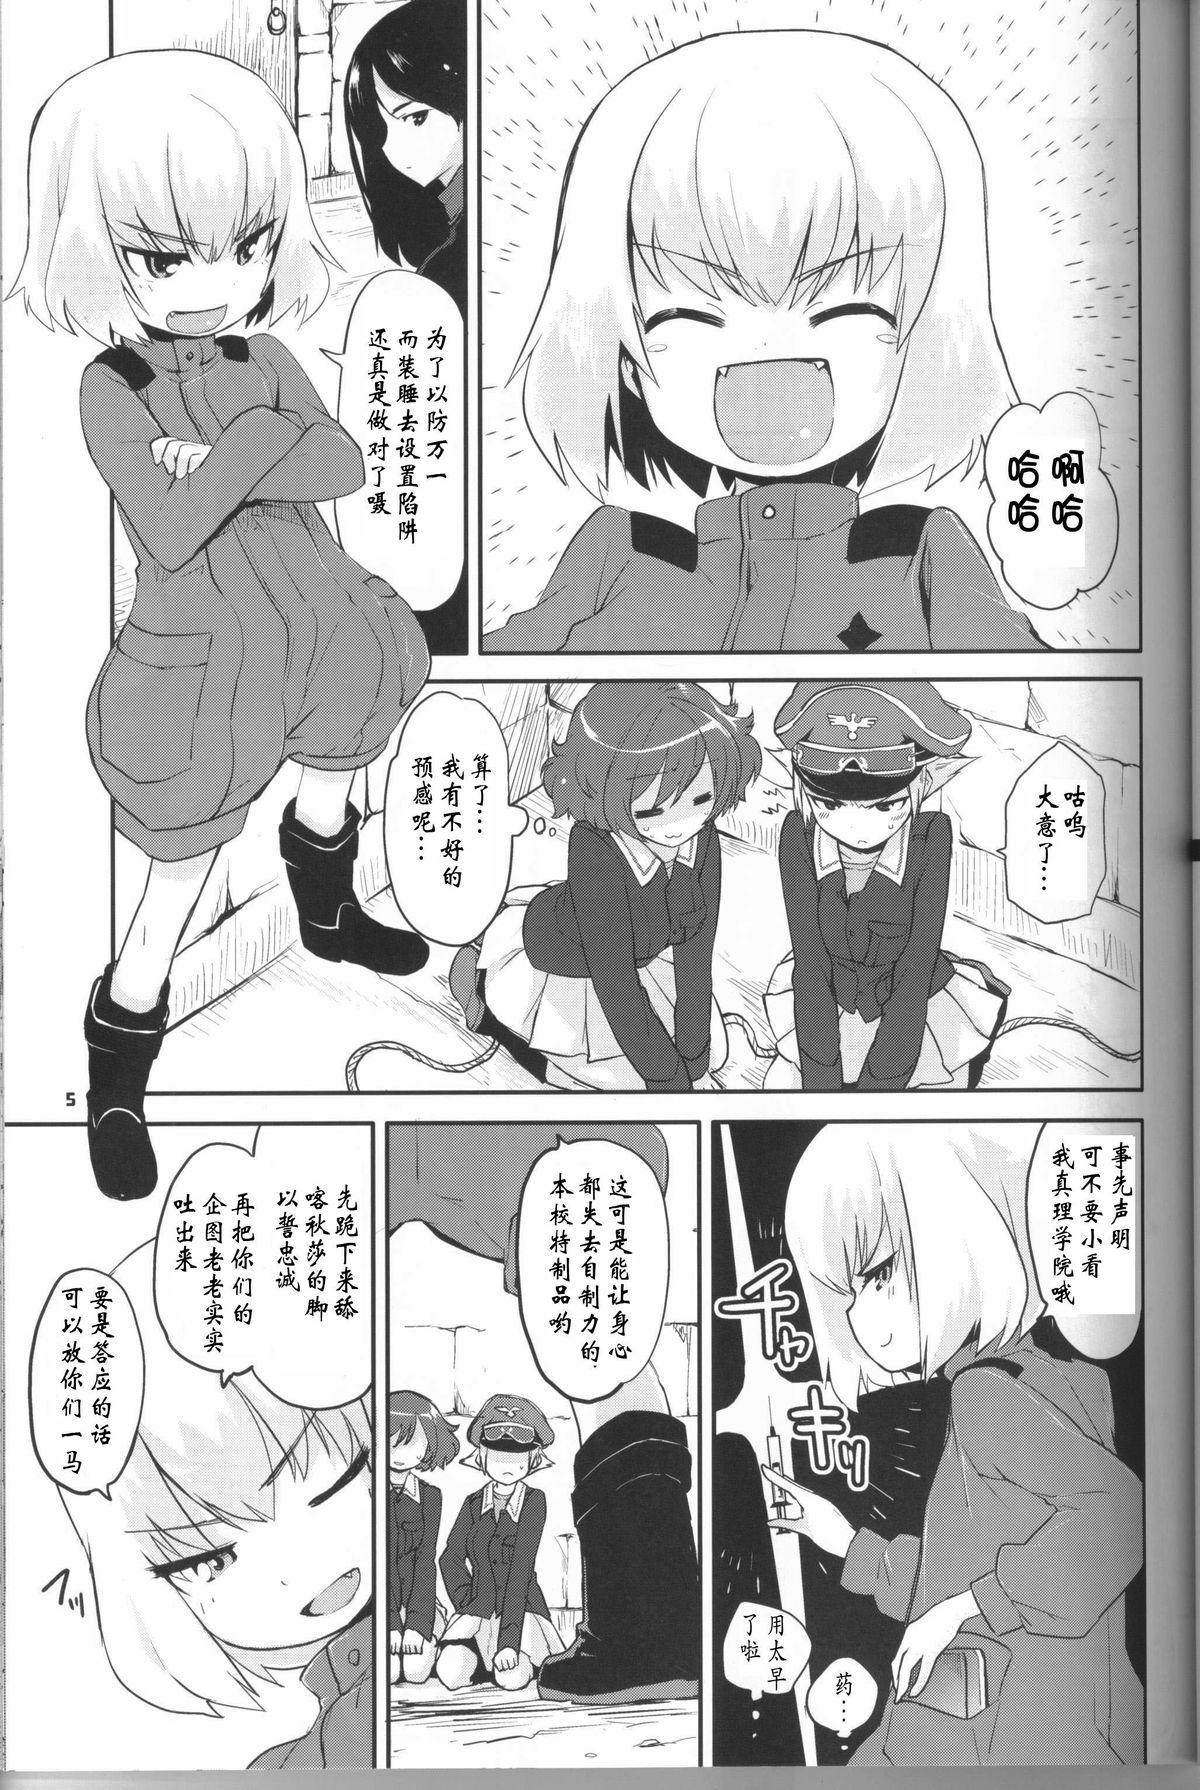 Fishnets The General Frost Has Come! - Girls und panzer Muscles - Page 4